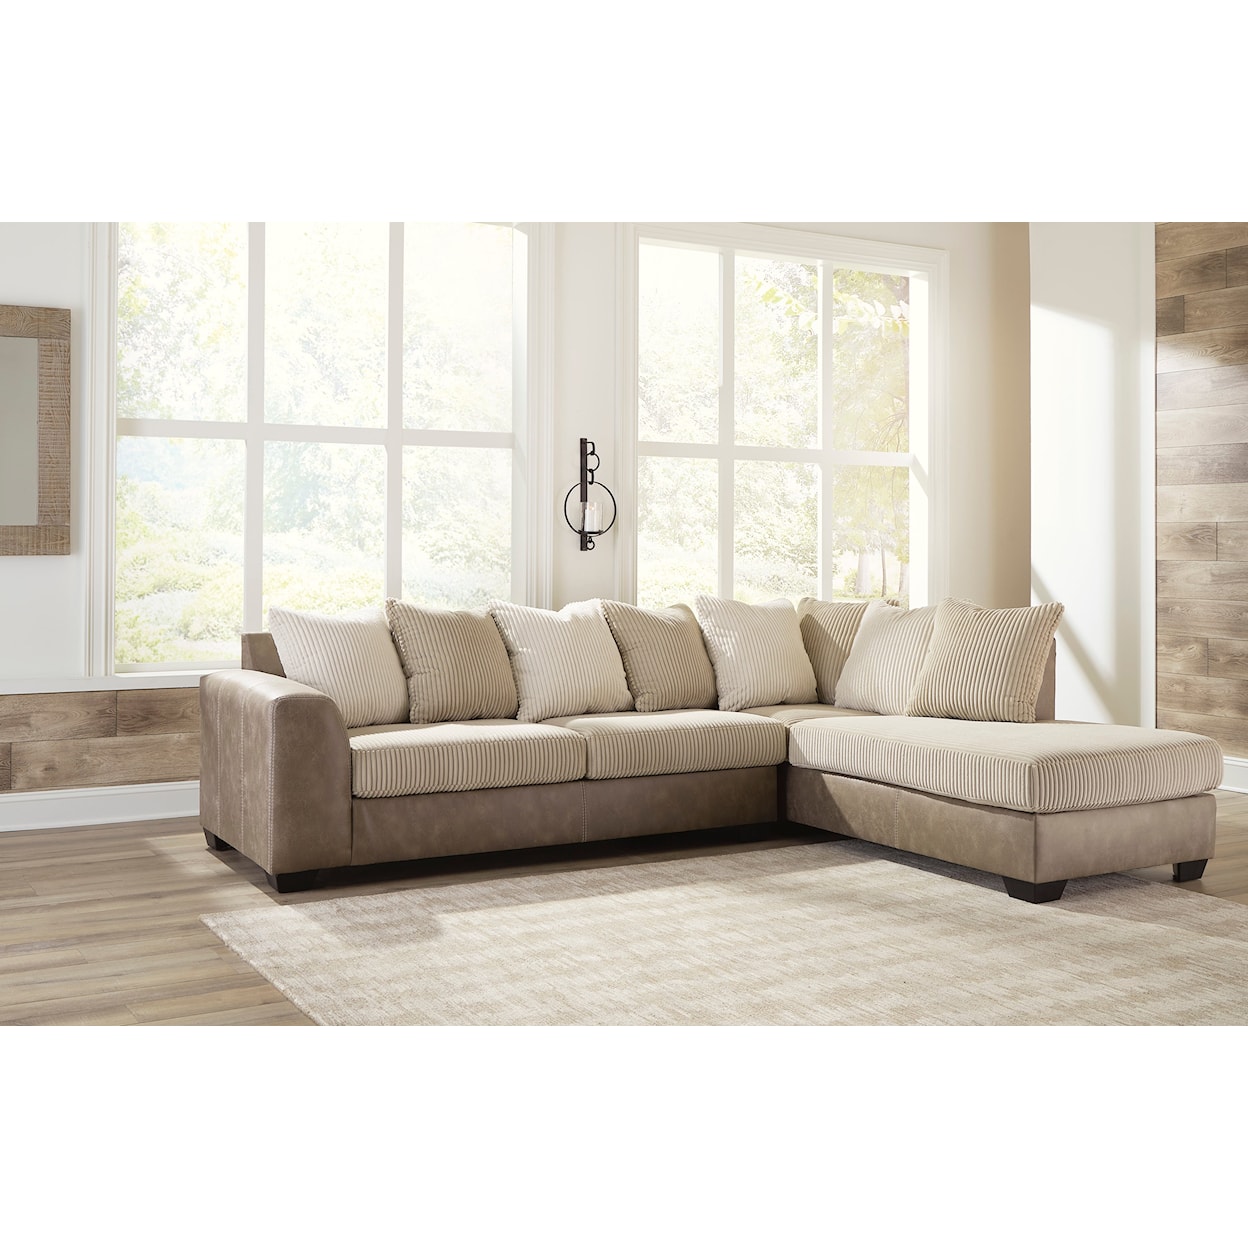 Signature Design by Ashley Furniture Keskin 2-Piece Sectional with Chaise